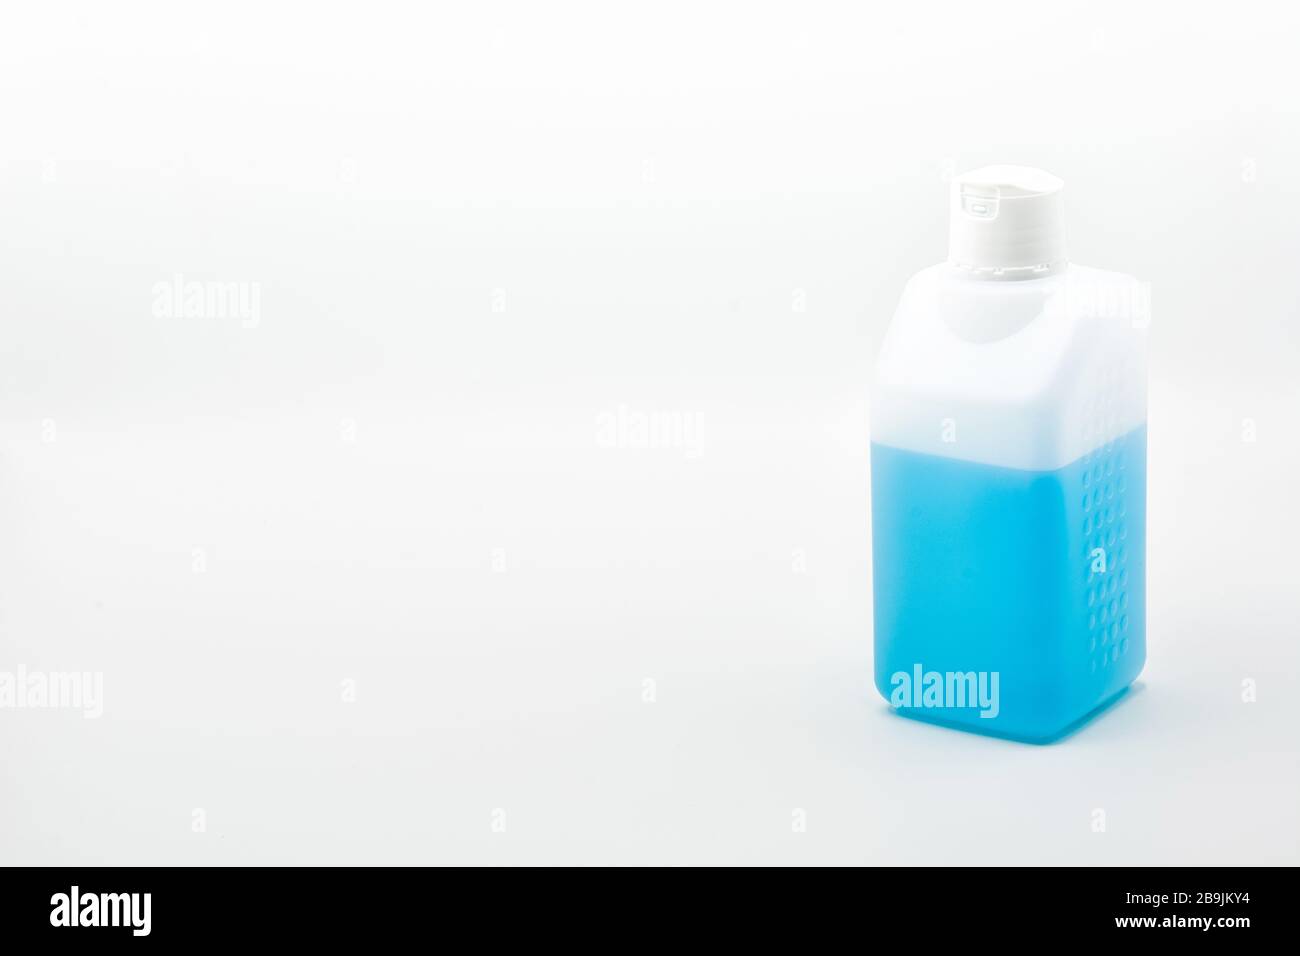 Alcohol disinfectant gel bottle isolated on white background.Copy space Stock Photo